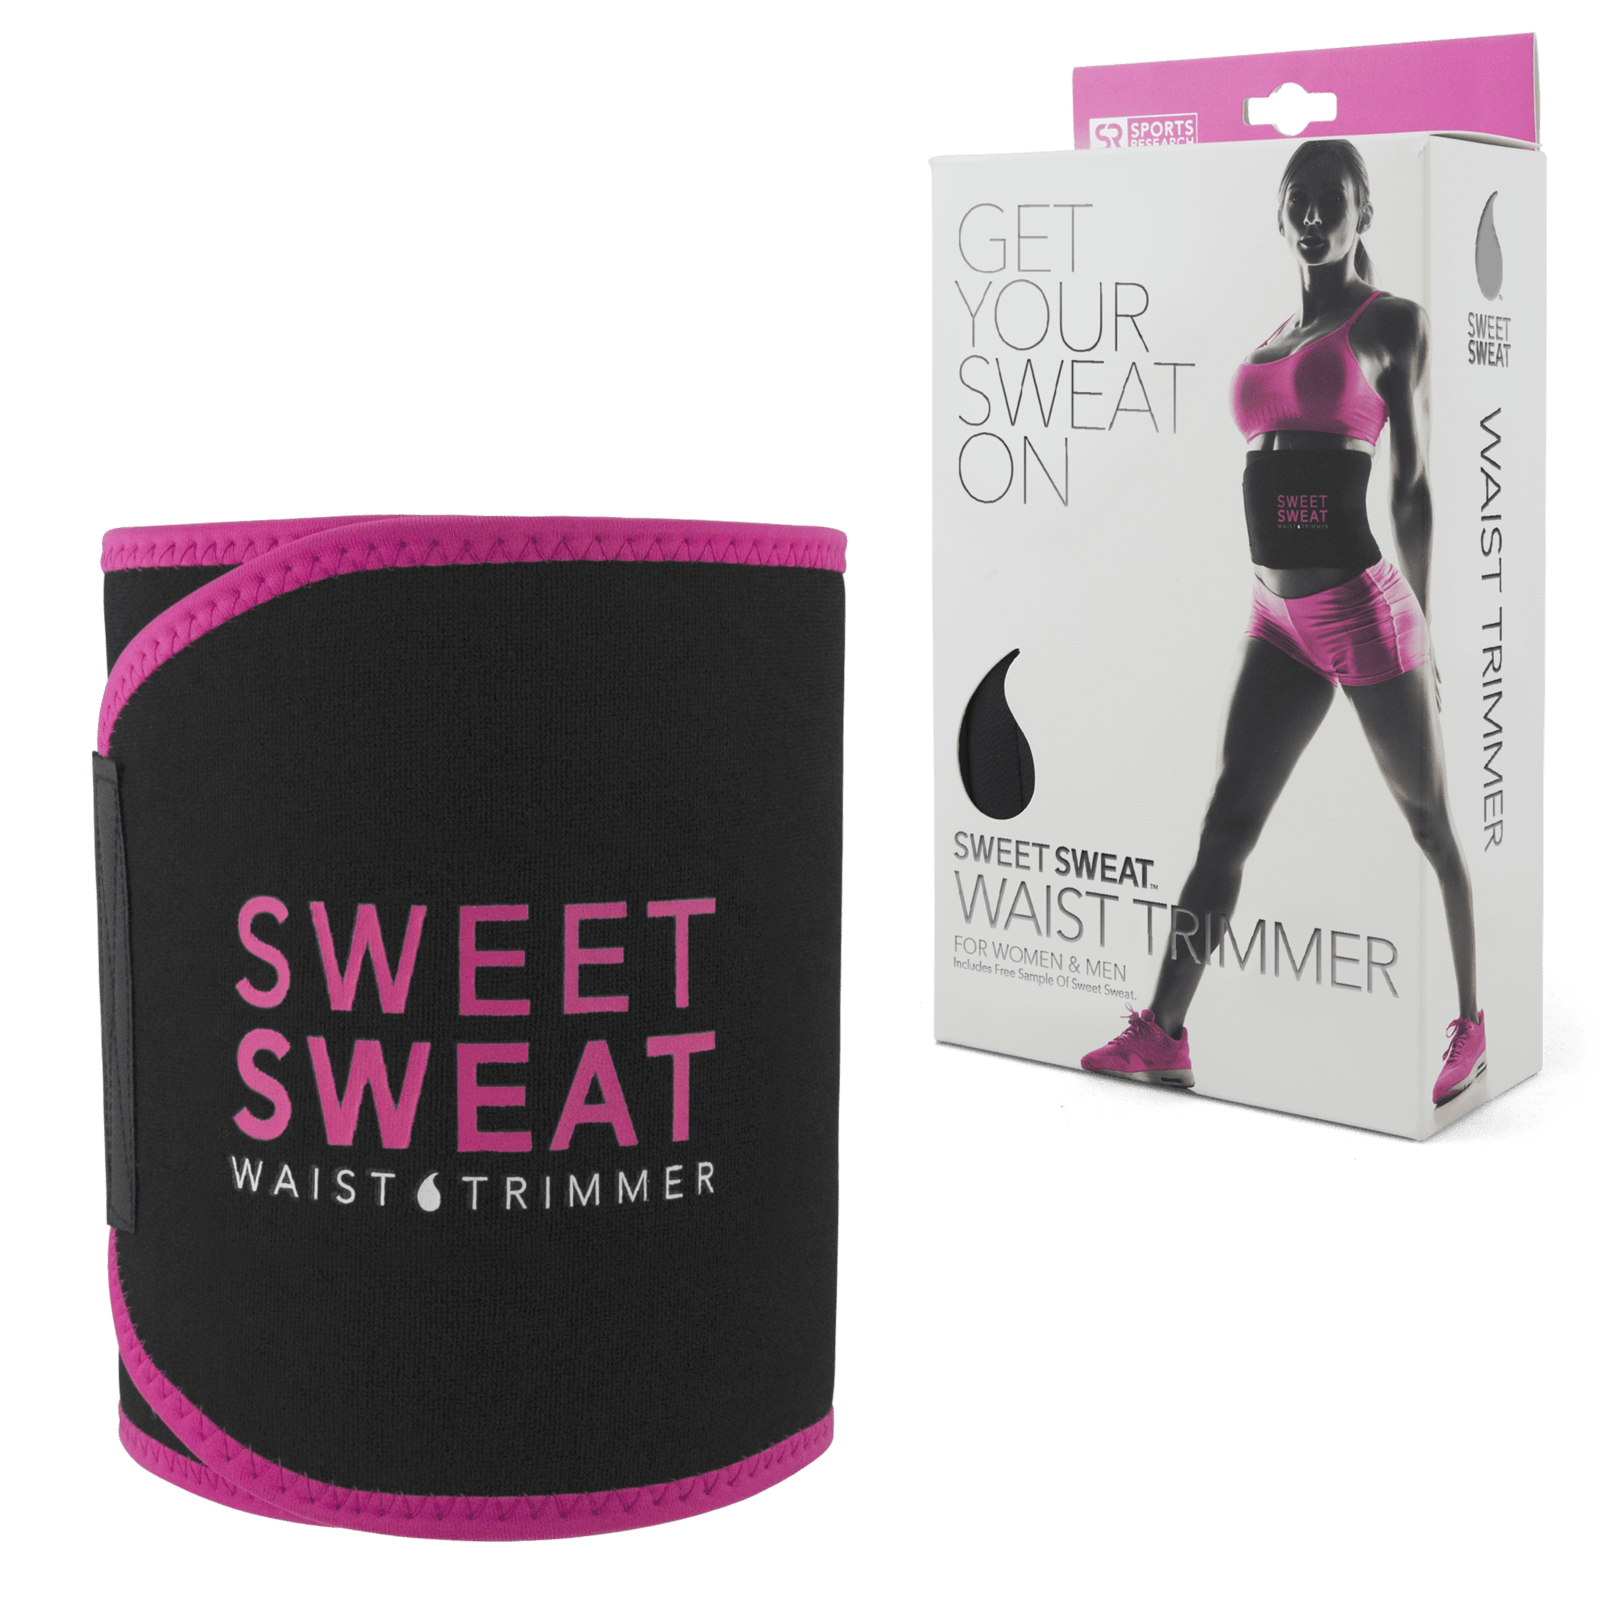 Sweet Sweat Waist Trimmer for Women & Men - Pink (One Size Fits Most) by  Sports Research Corporation at the Vitamin Shoppe